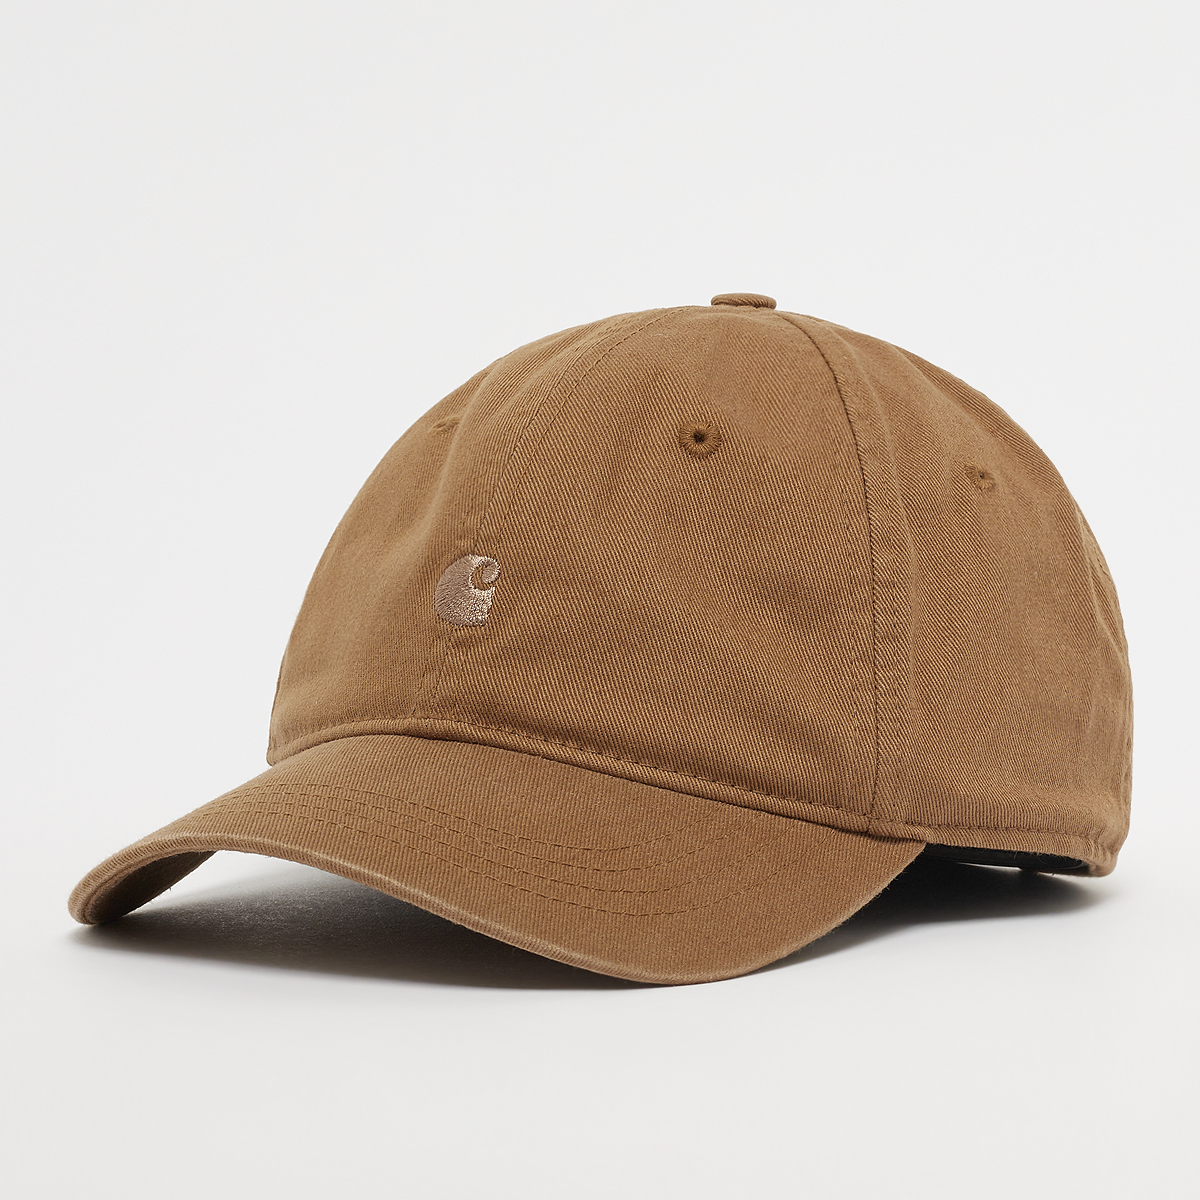 carhartt wip madison logo cap, casquettes de baseball, accessoires, buffalo, taille: one size, tailles disponibles:one size